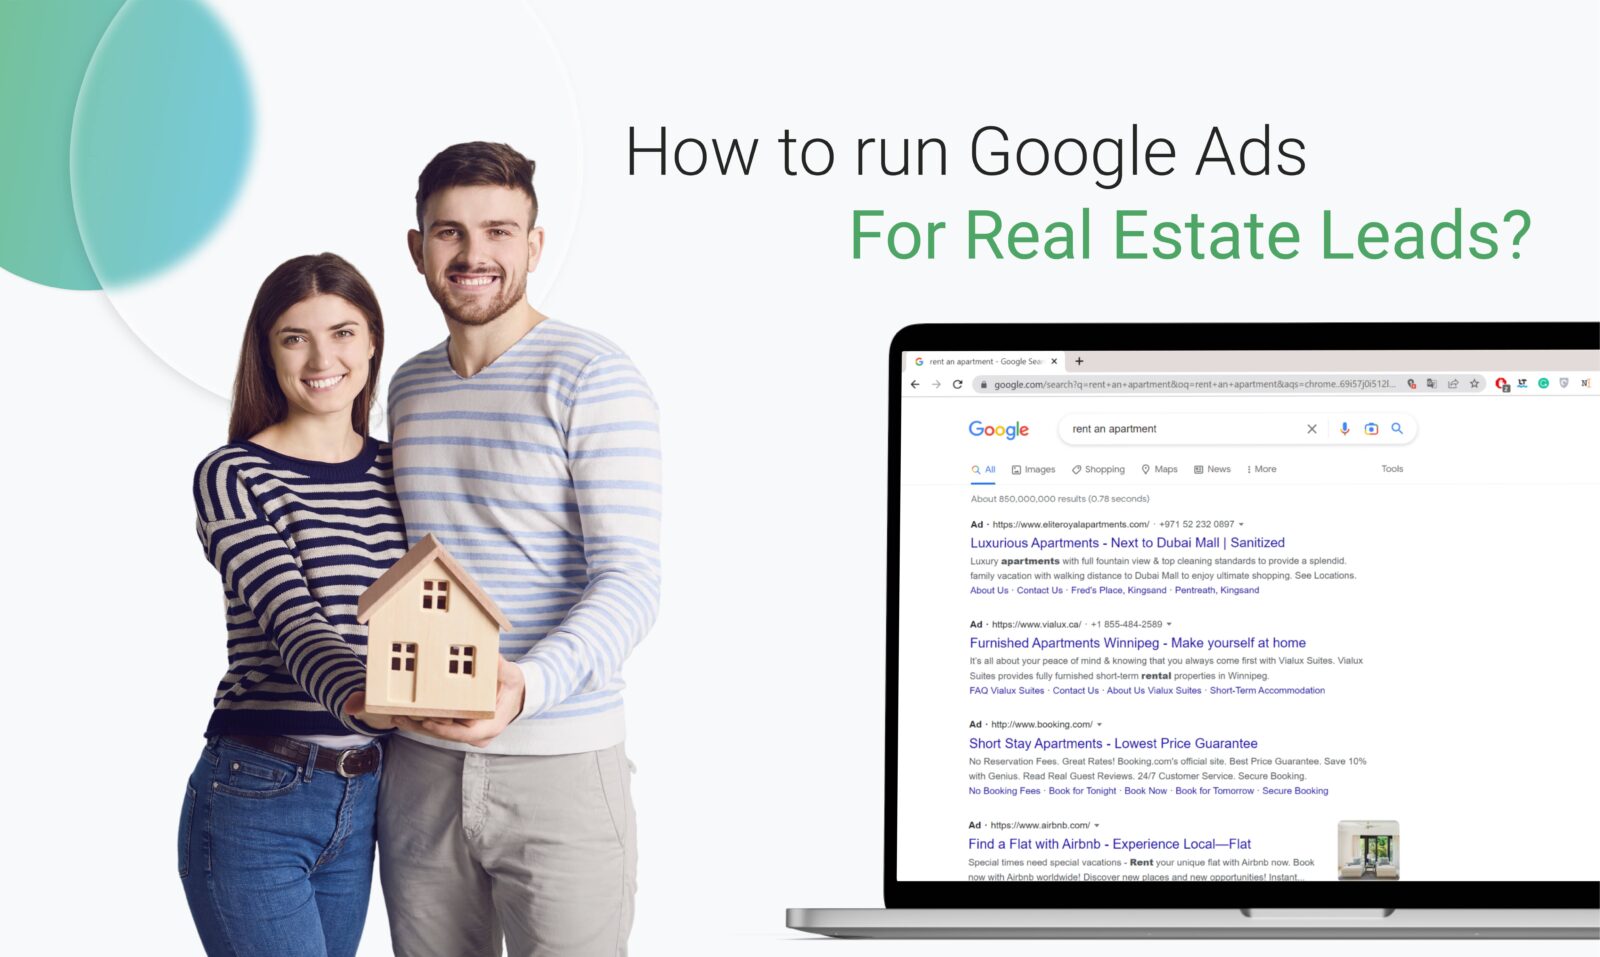 How To Run Google Ads For Real Estate Leads